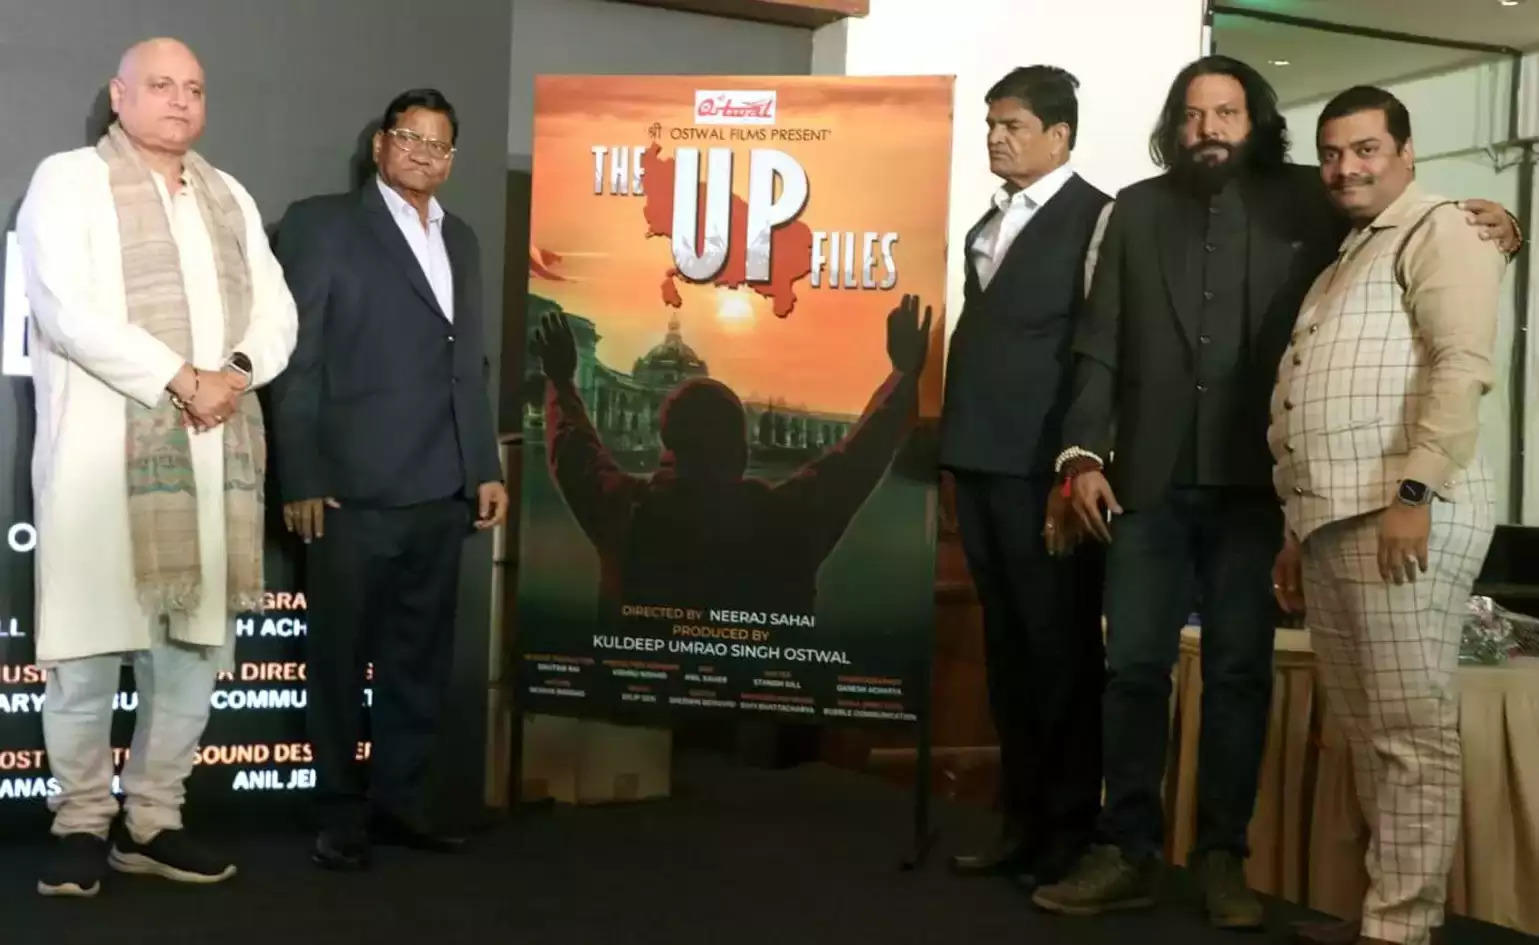 Anupam Kher Unveils the first look of Hindi film 'The UP Files'